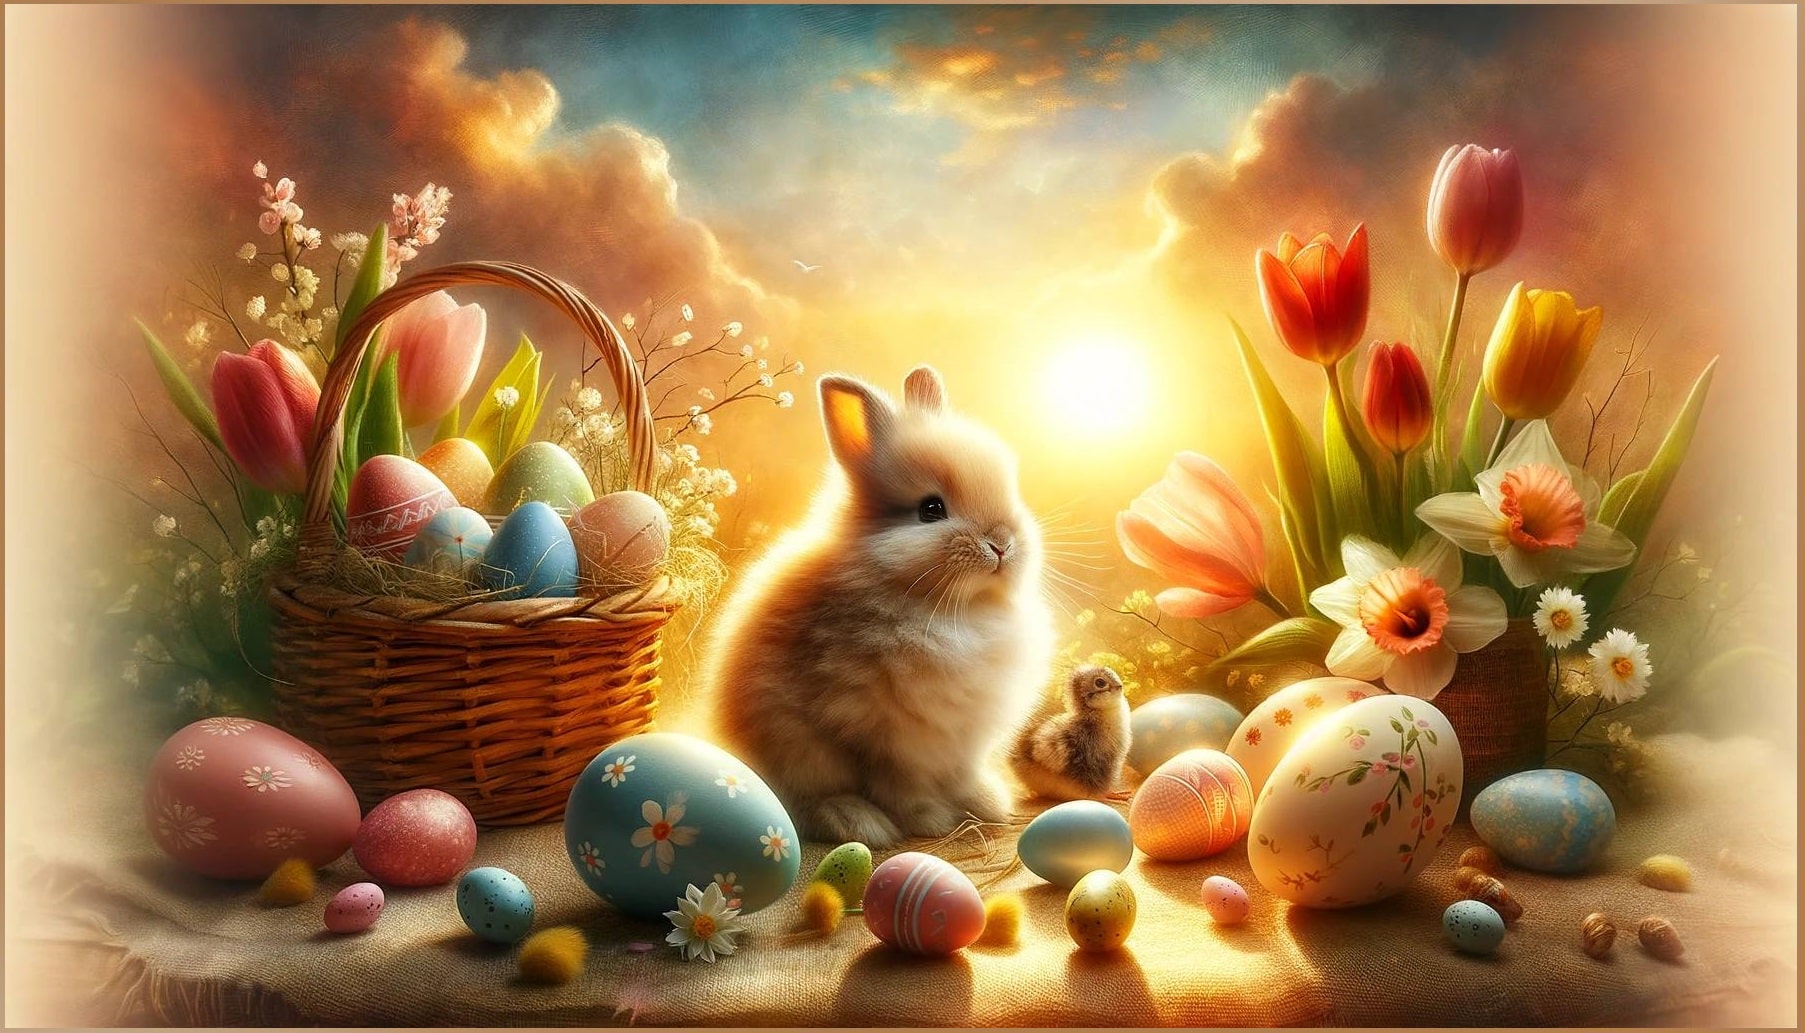 Easter scene with painted eggs, spring flowers, and a bunny representing the spring equinox's spiritual renewal and the festive revival of nature.